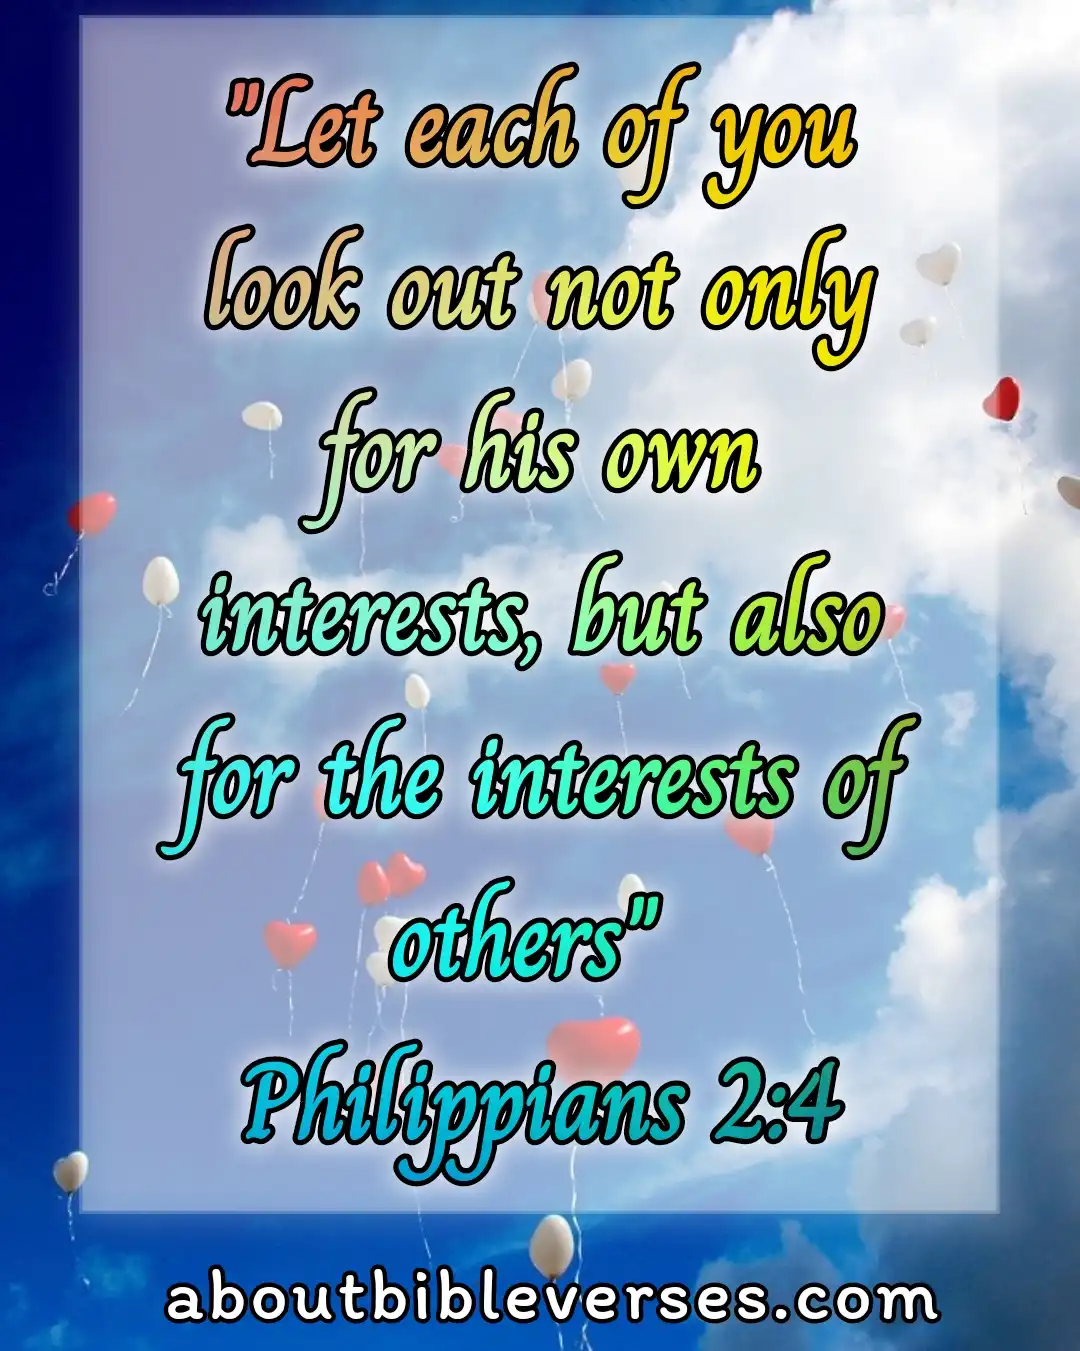 Bible Verses About Serving Others (Philippians 2:4)